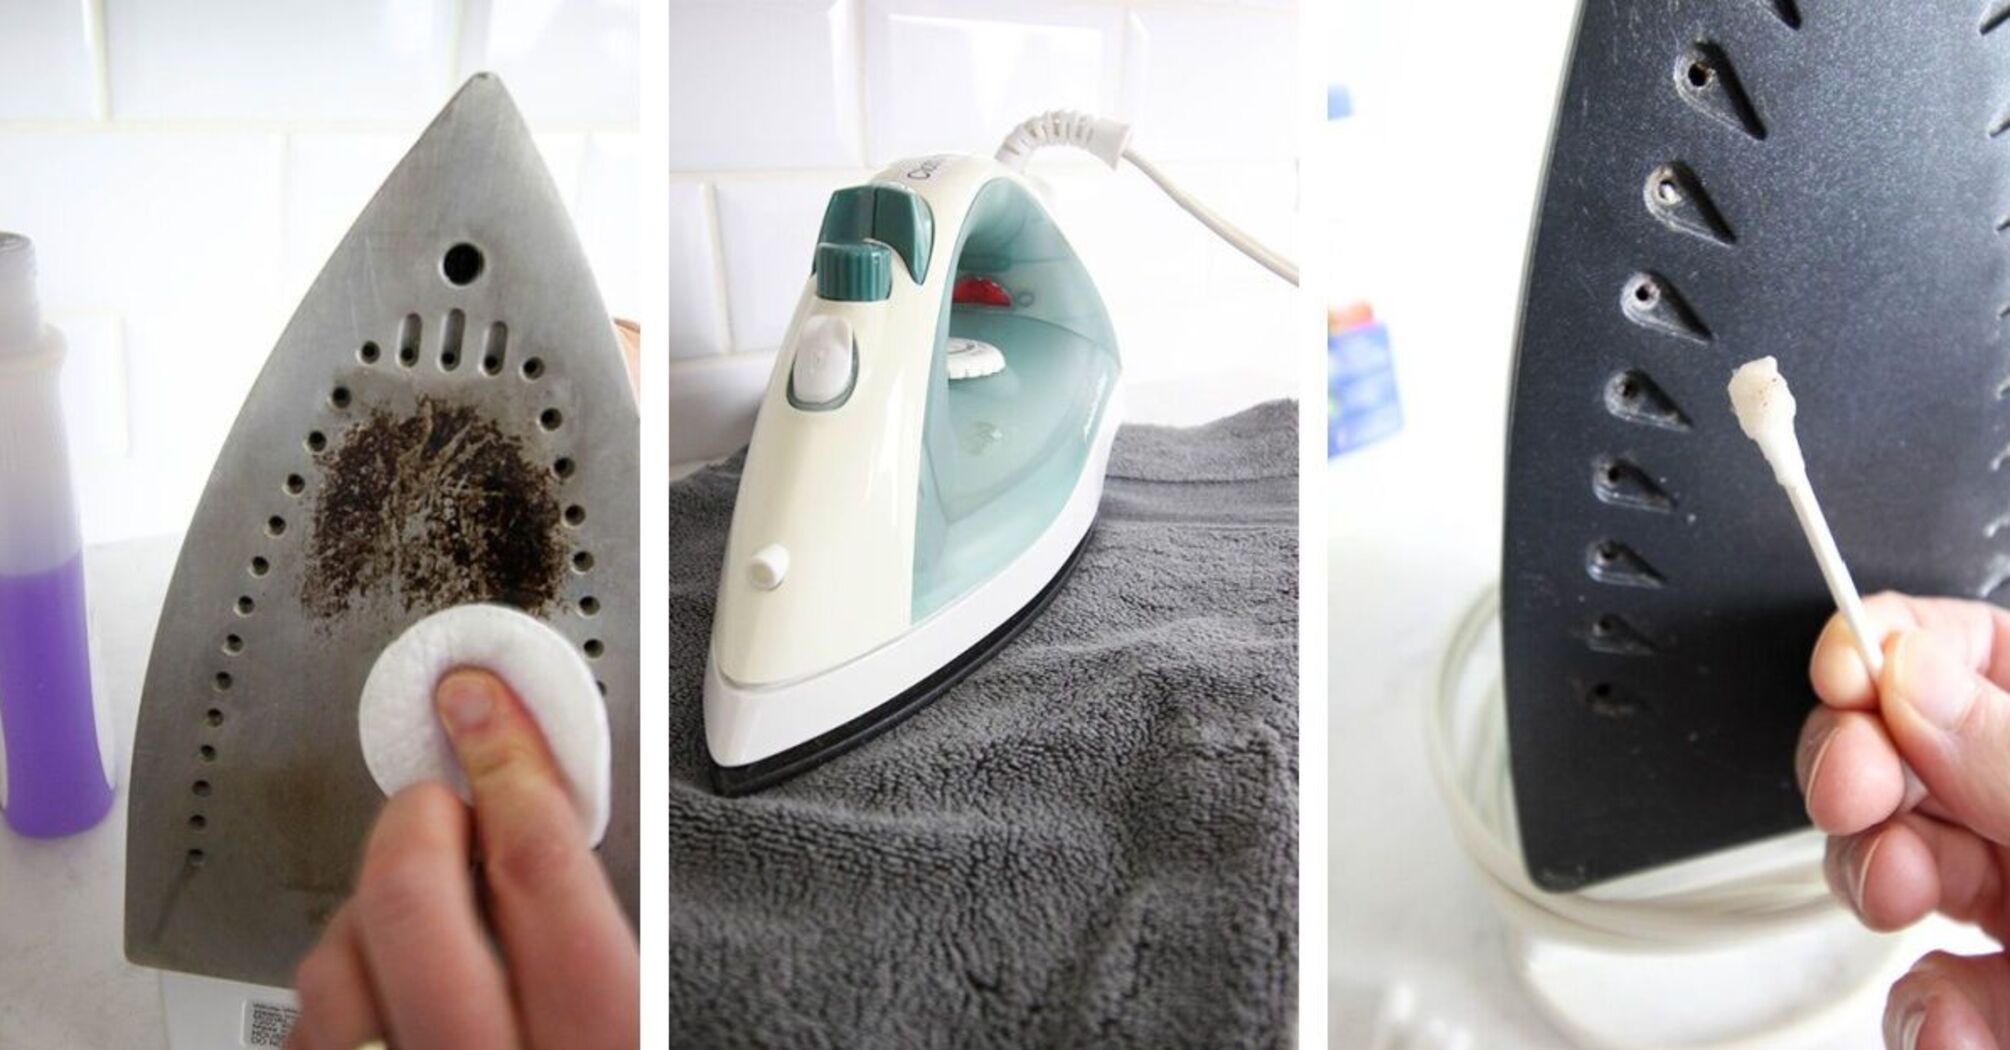 How to descale an iron quickly and easily